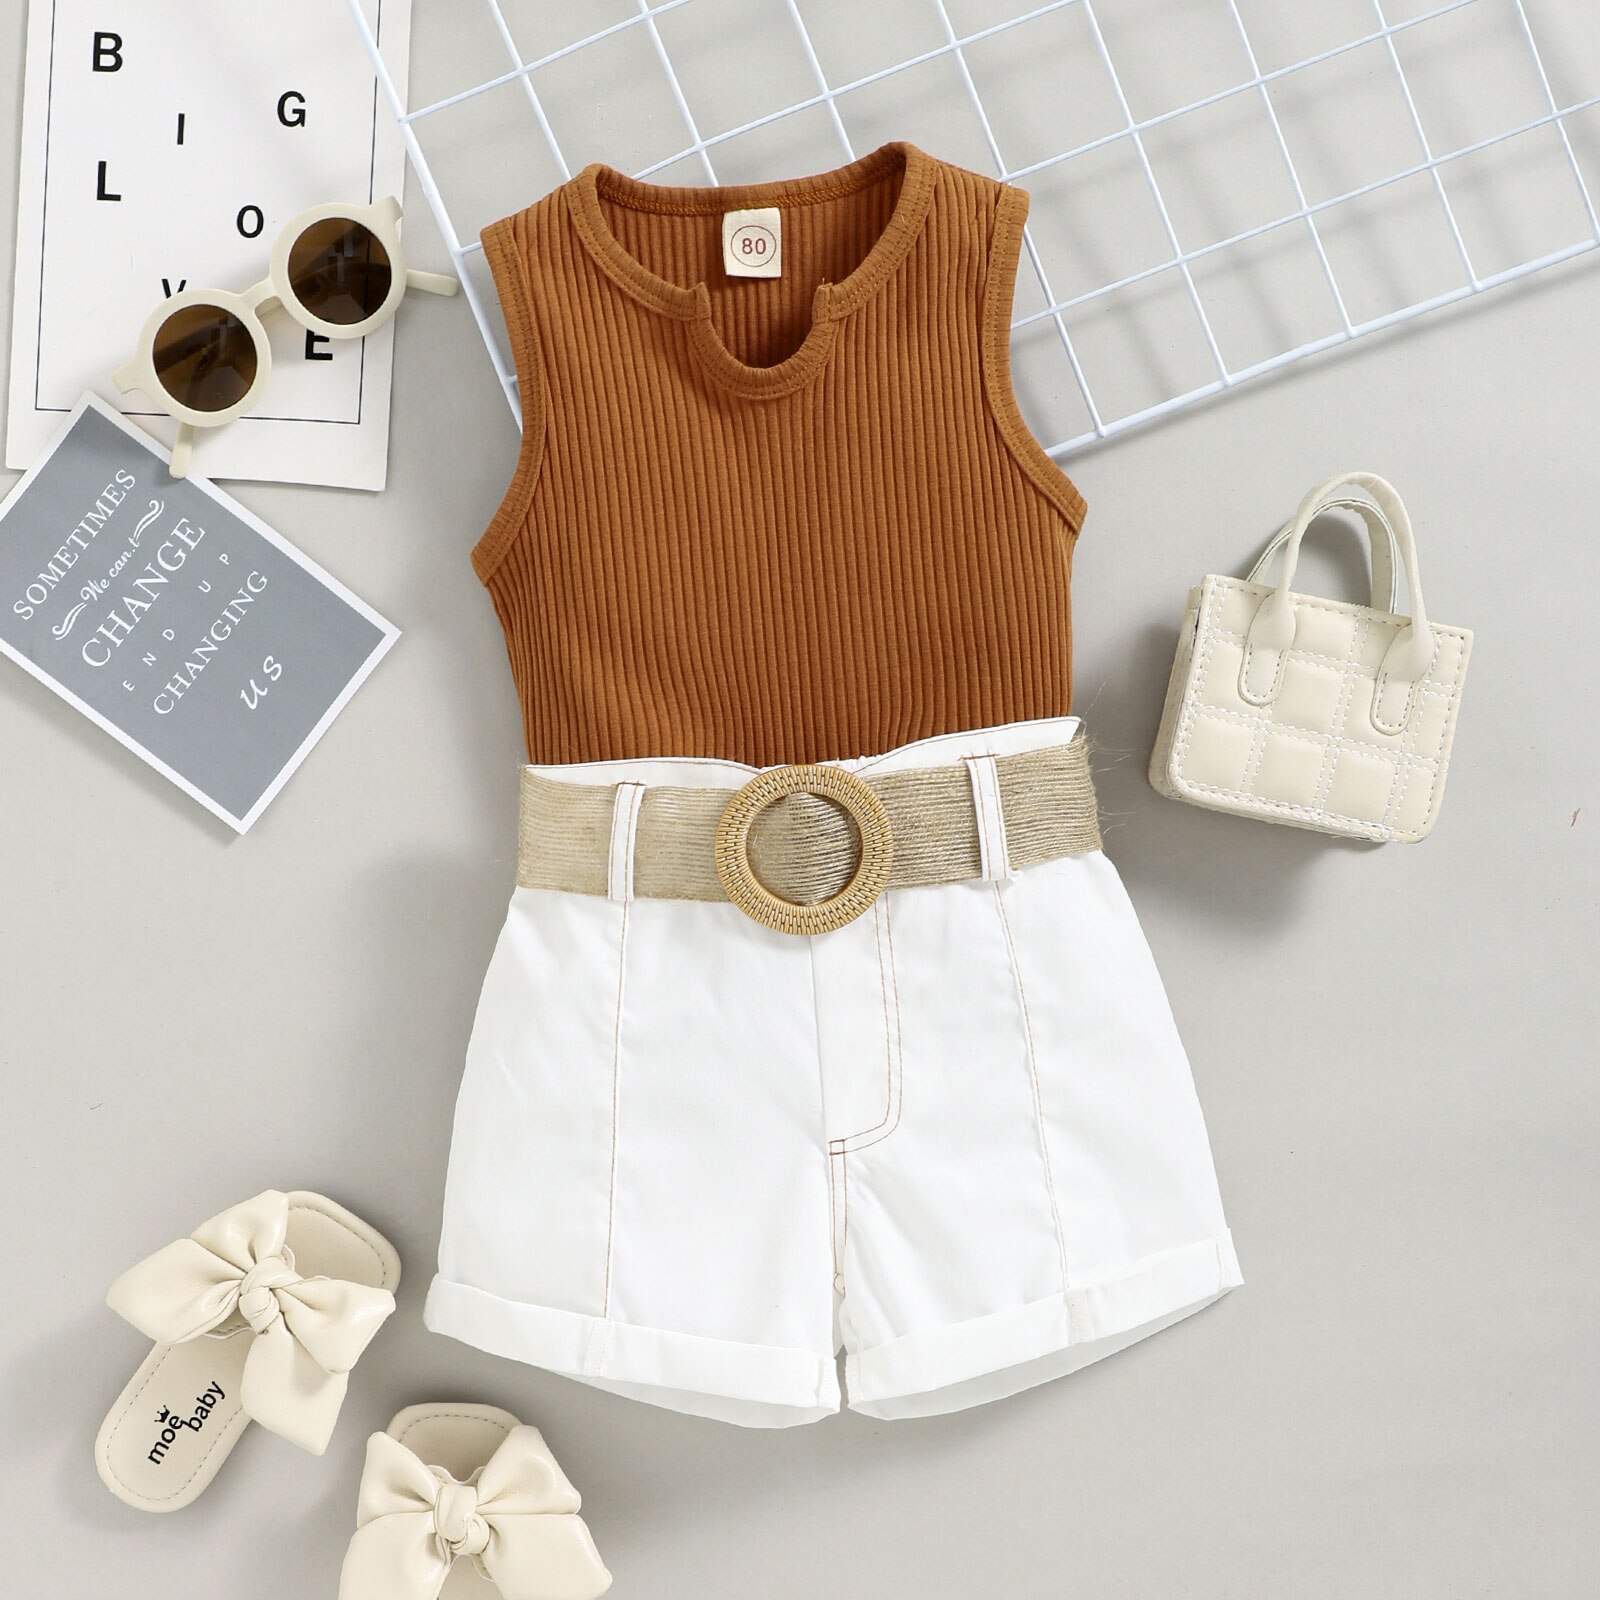 Baby-Girls-Clothes-Sets-Summer-Solid-Color-Ribbed-Girl-Sleeveless-Tops-Belted-Shorts-2pcs-Suit-Casual-1